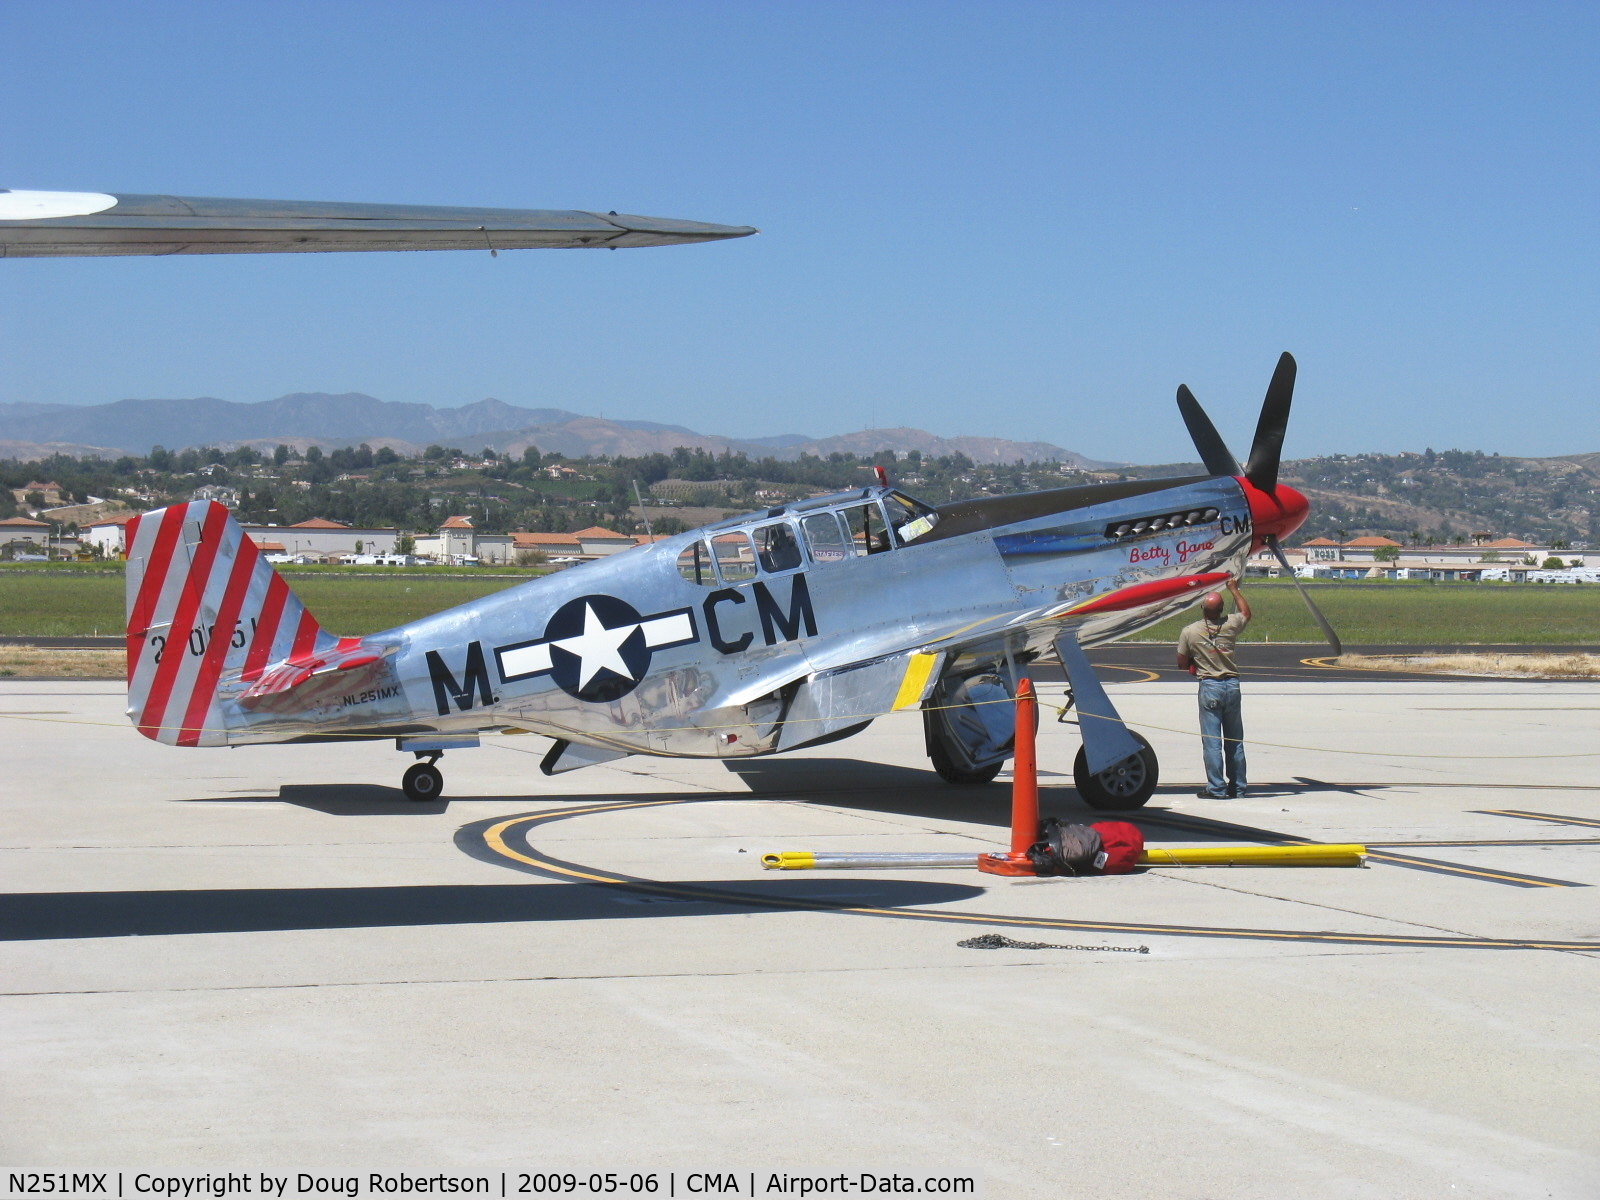 N251MX, 1943 North American P-51C-10 Mustang C/N 103-22730, 1943 North American TP-51C-10 MUSTANG as NL251MX 'Betty Jane', Packard LIBERTY/RR V-1650-3 1,380 Hp, modified for tandem dual control, Limited class. World's SOLE REMAINING EXAMPLE of just five tandem TP-51Cs built.